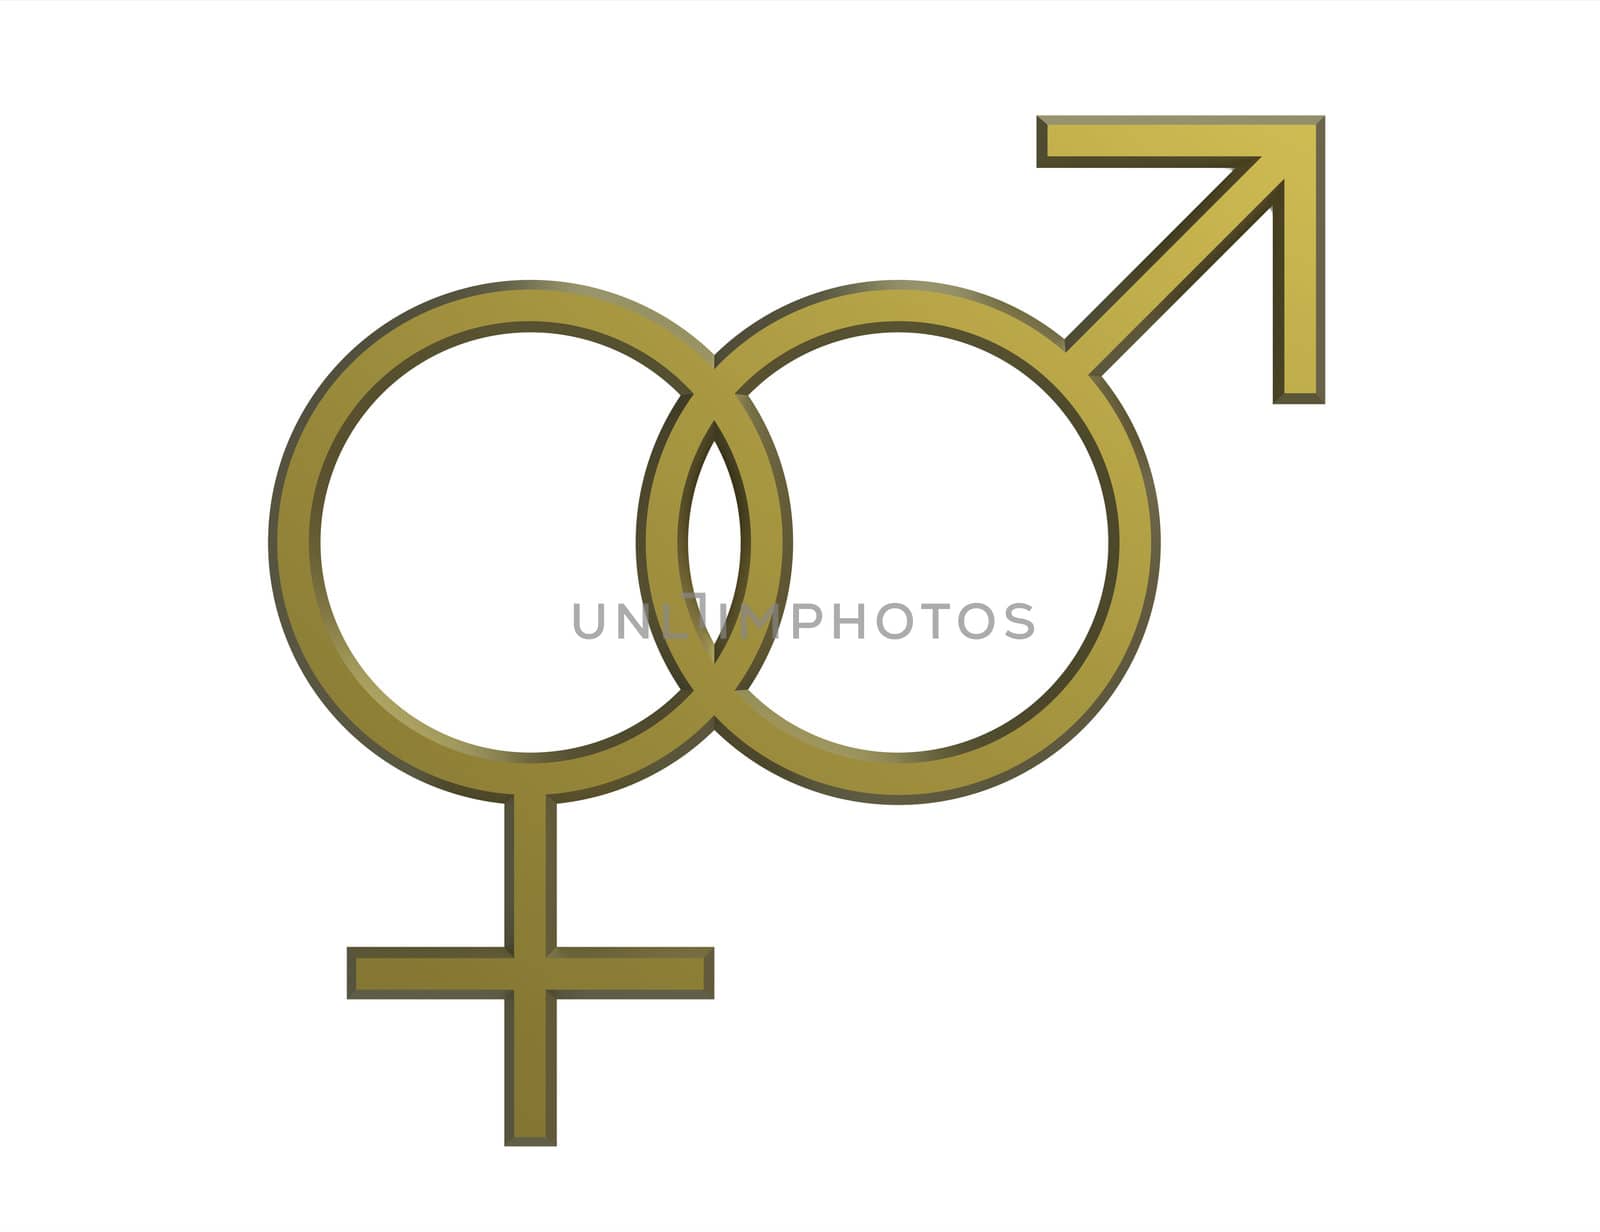 Male and female seks symbol render isolated on white